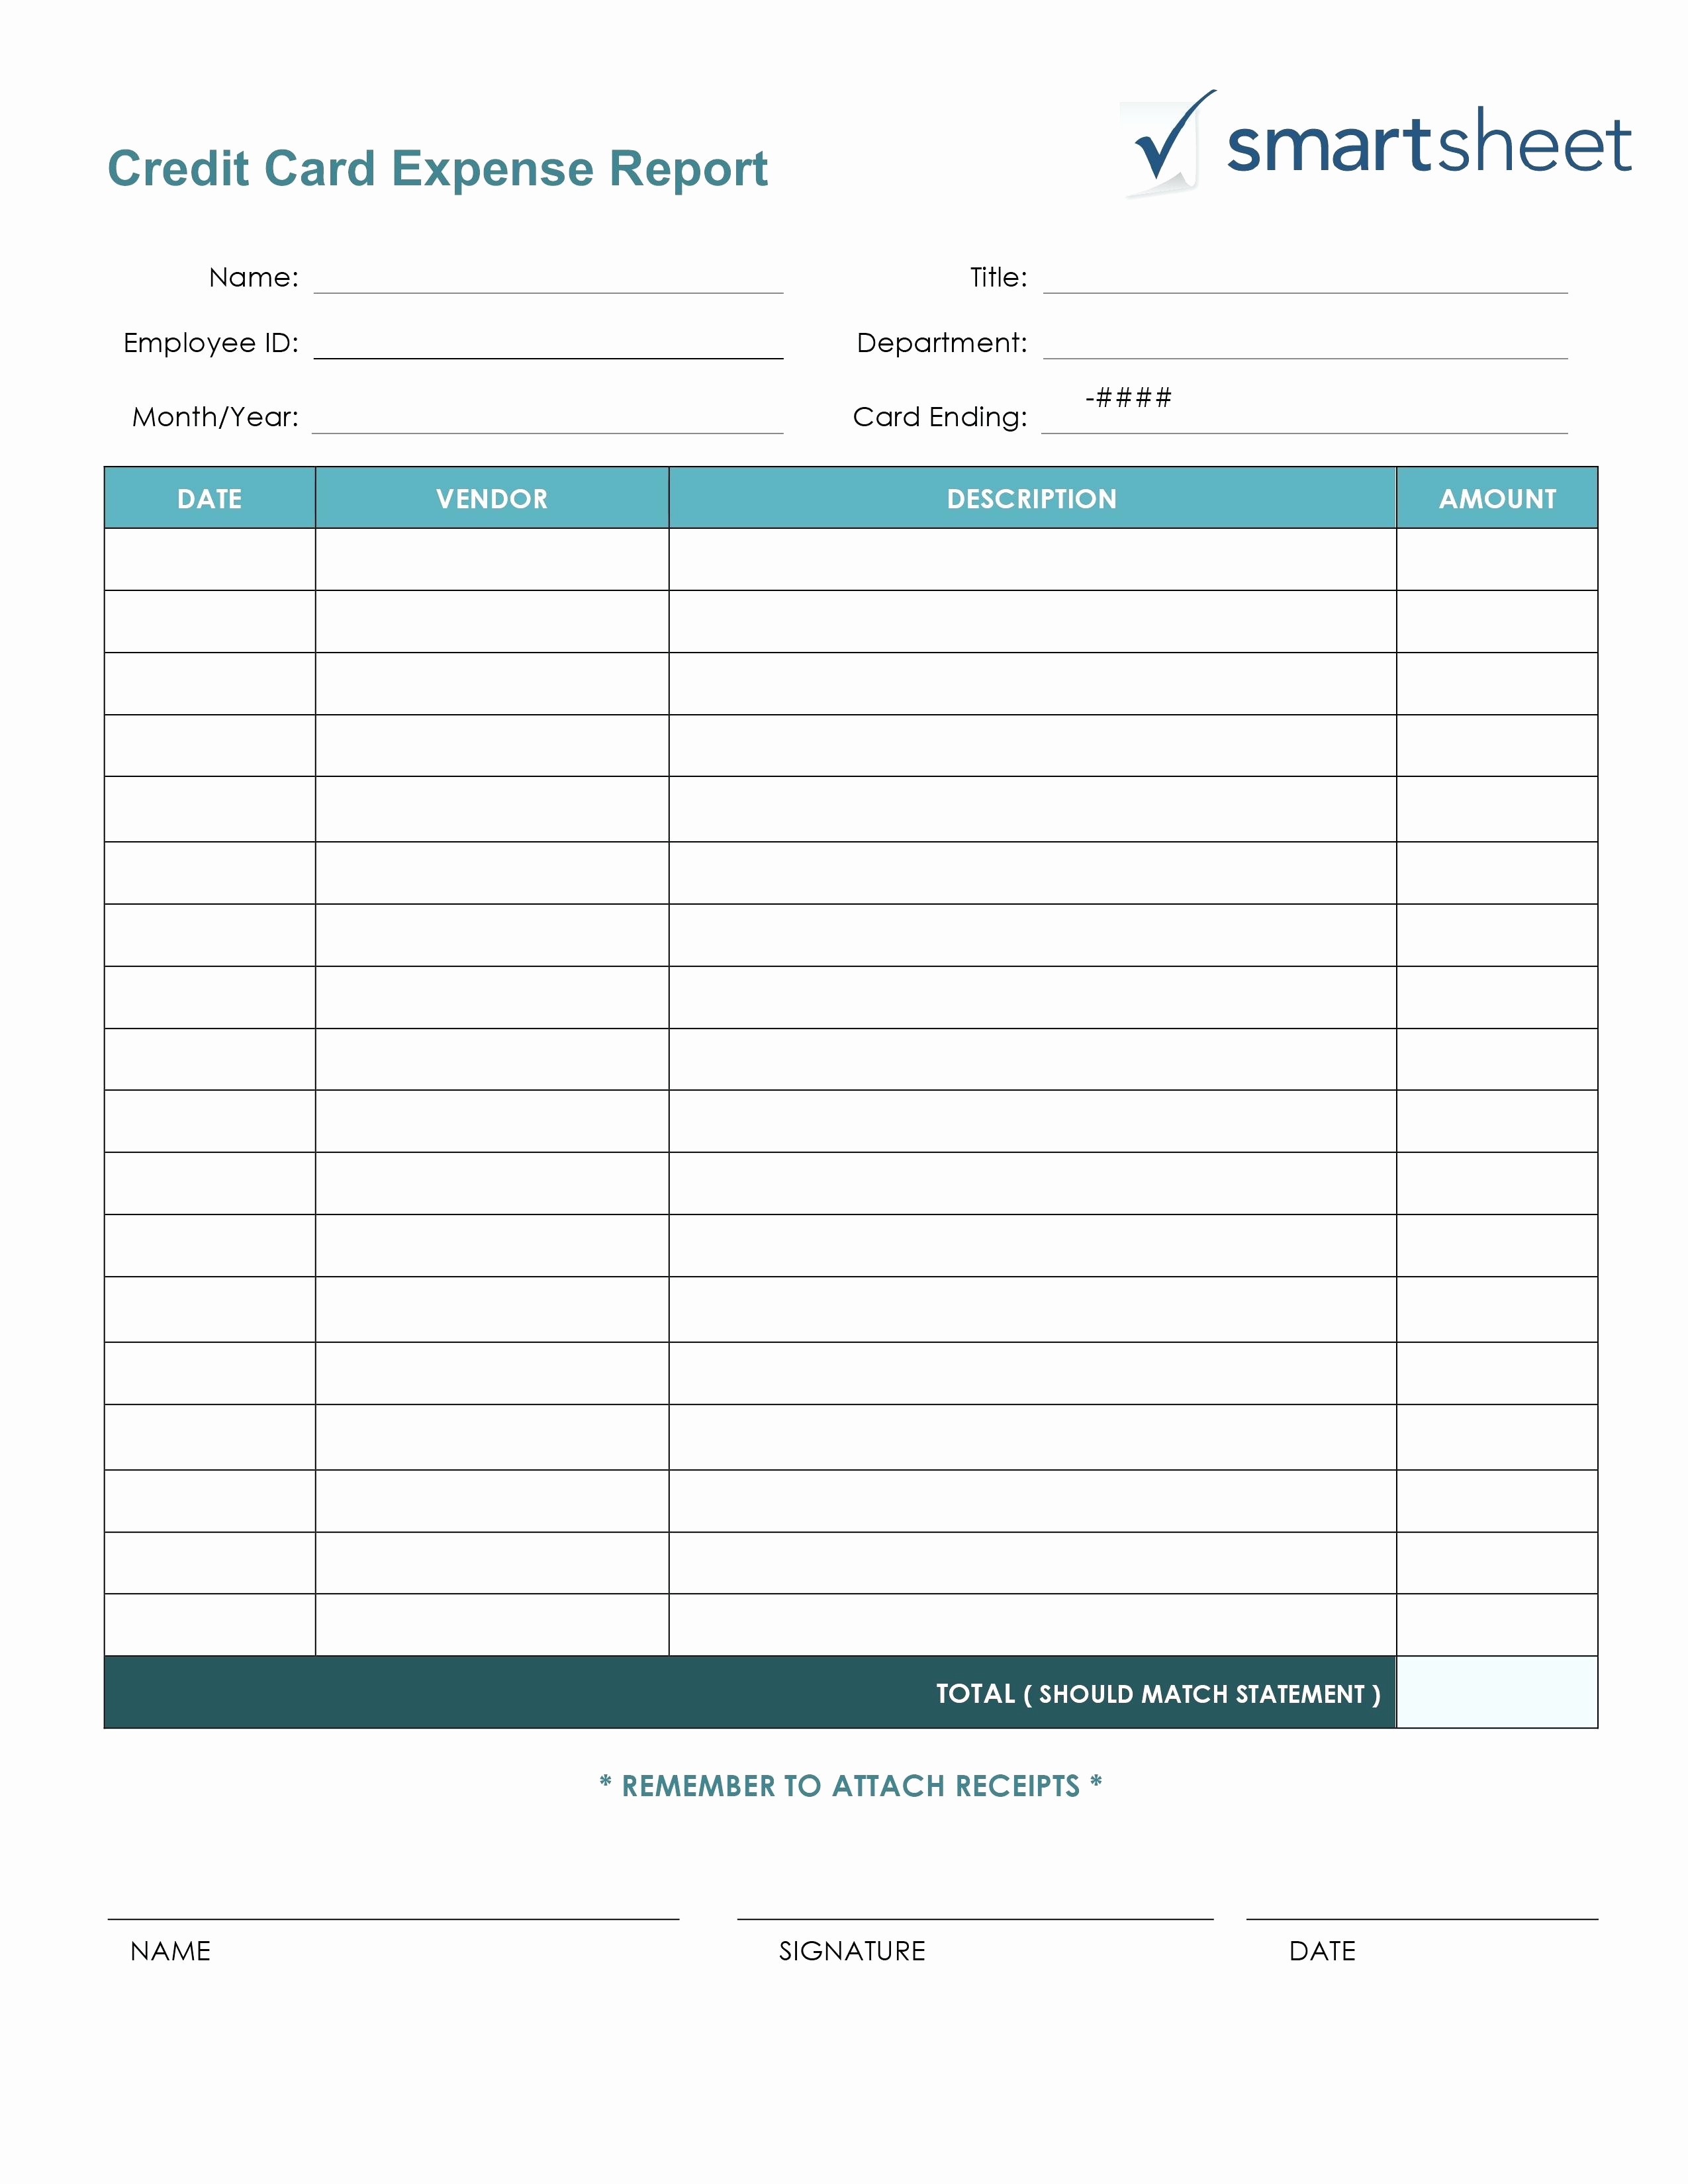 Annual Profit and Loss Statement Fresh Template Annual In E Statement Template